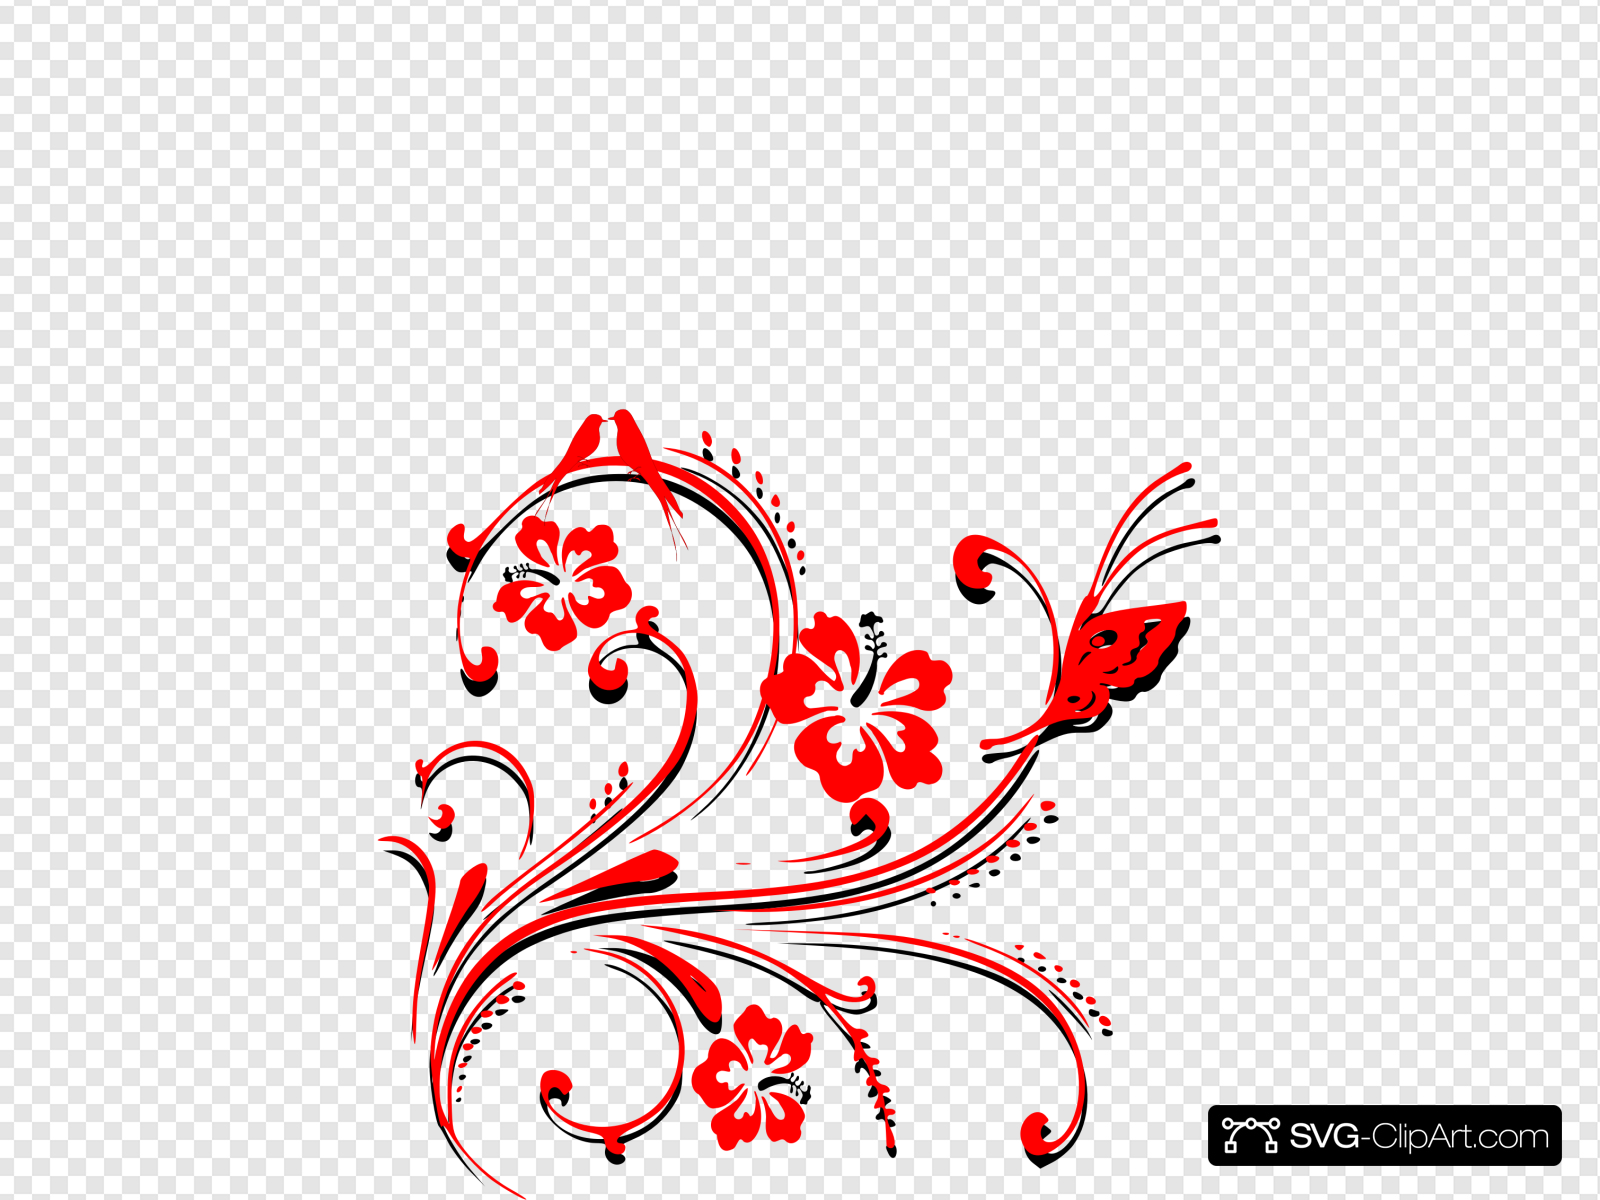 Butterfly Scroll Clip art, Icon and SVG